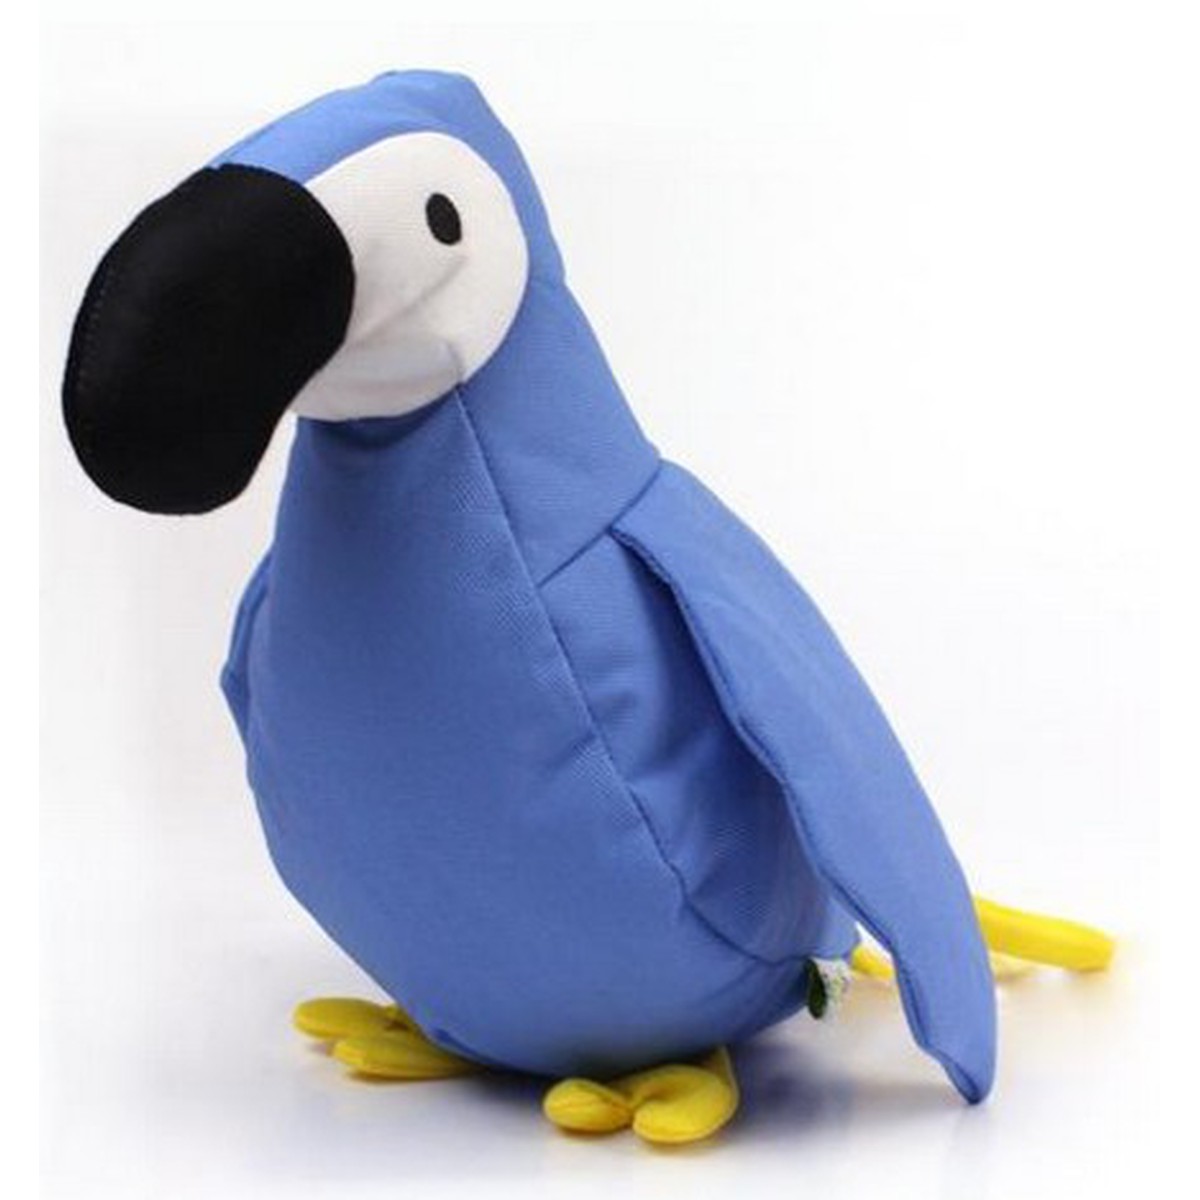   Beco Soft Toy - Parrot - Small  Small